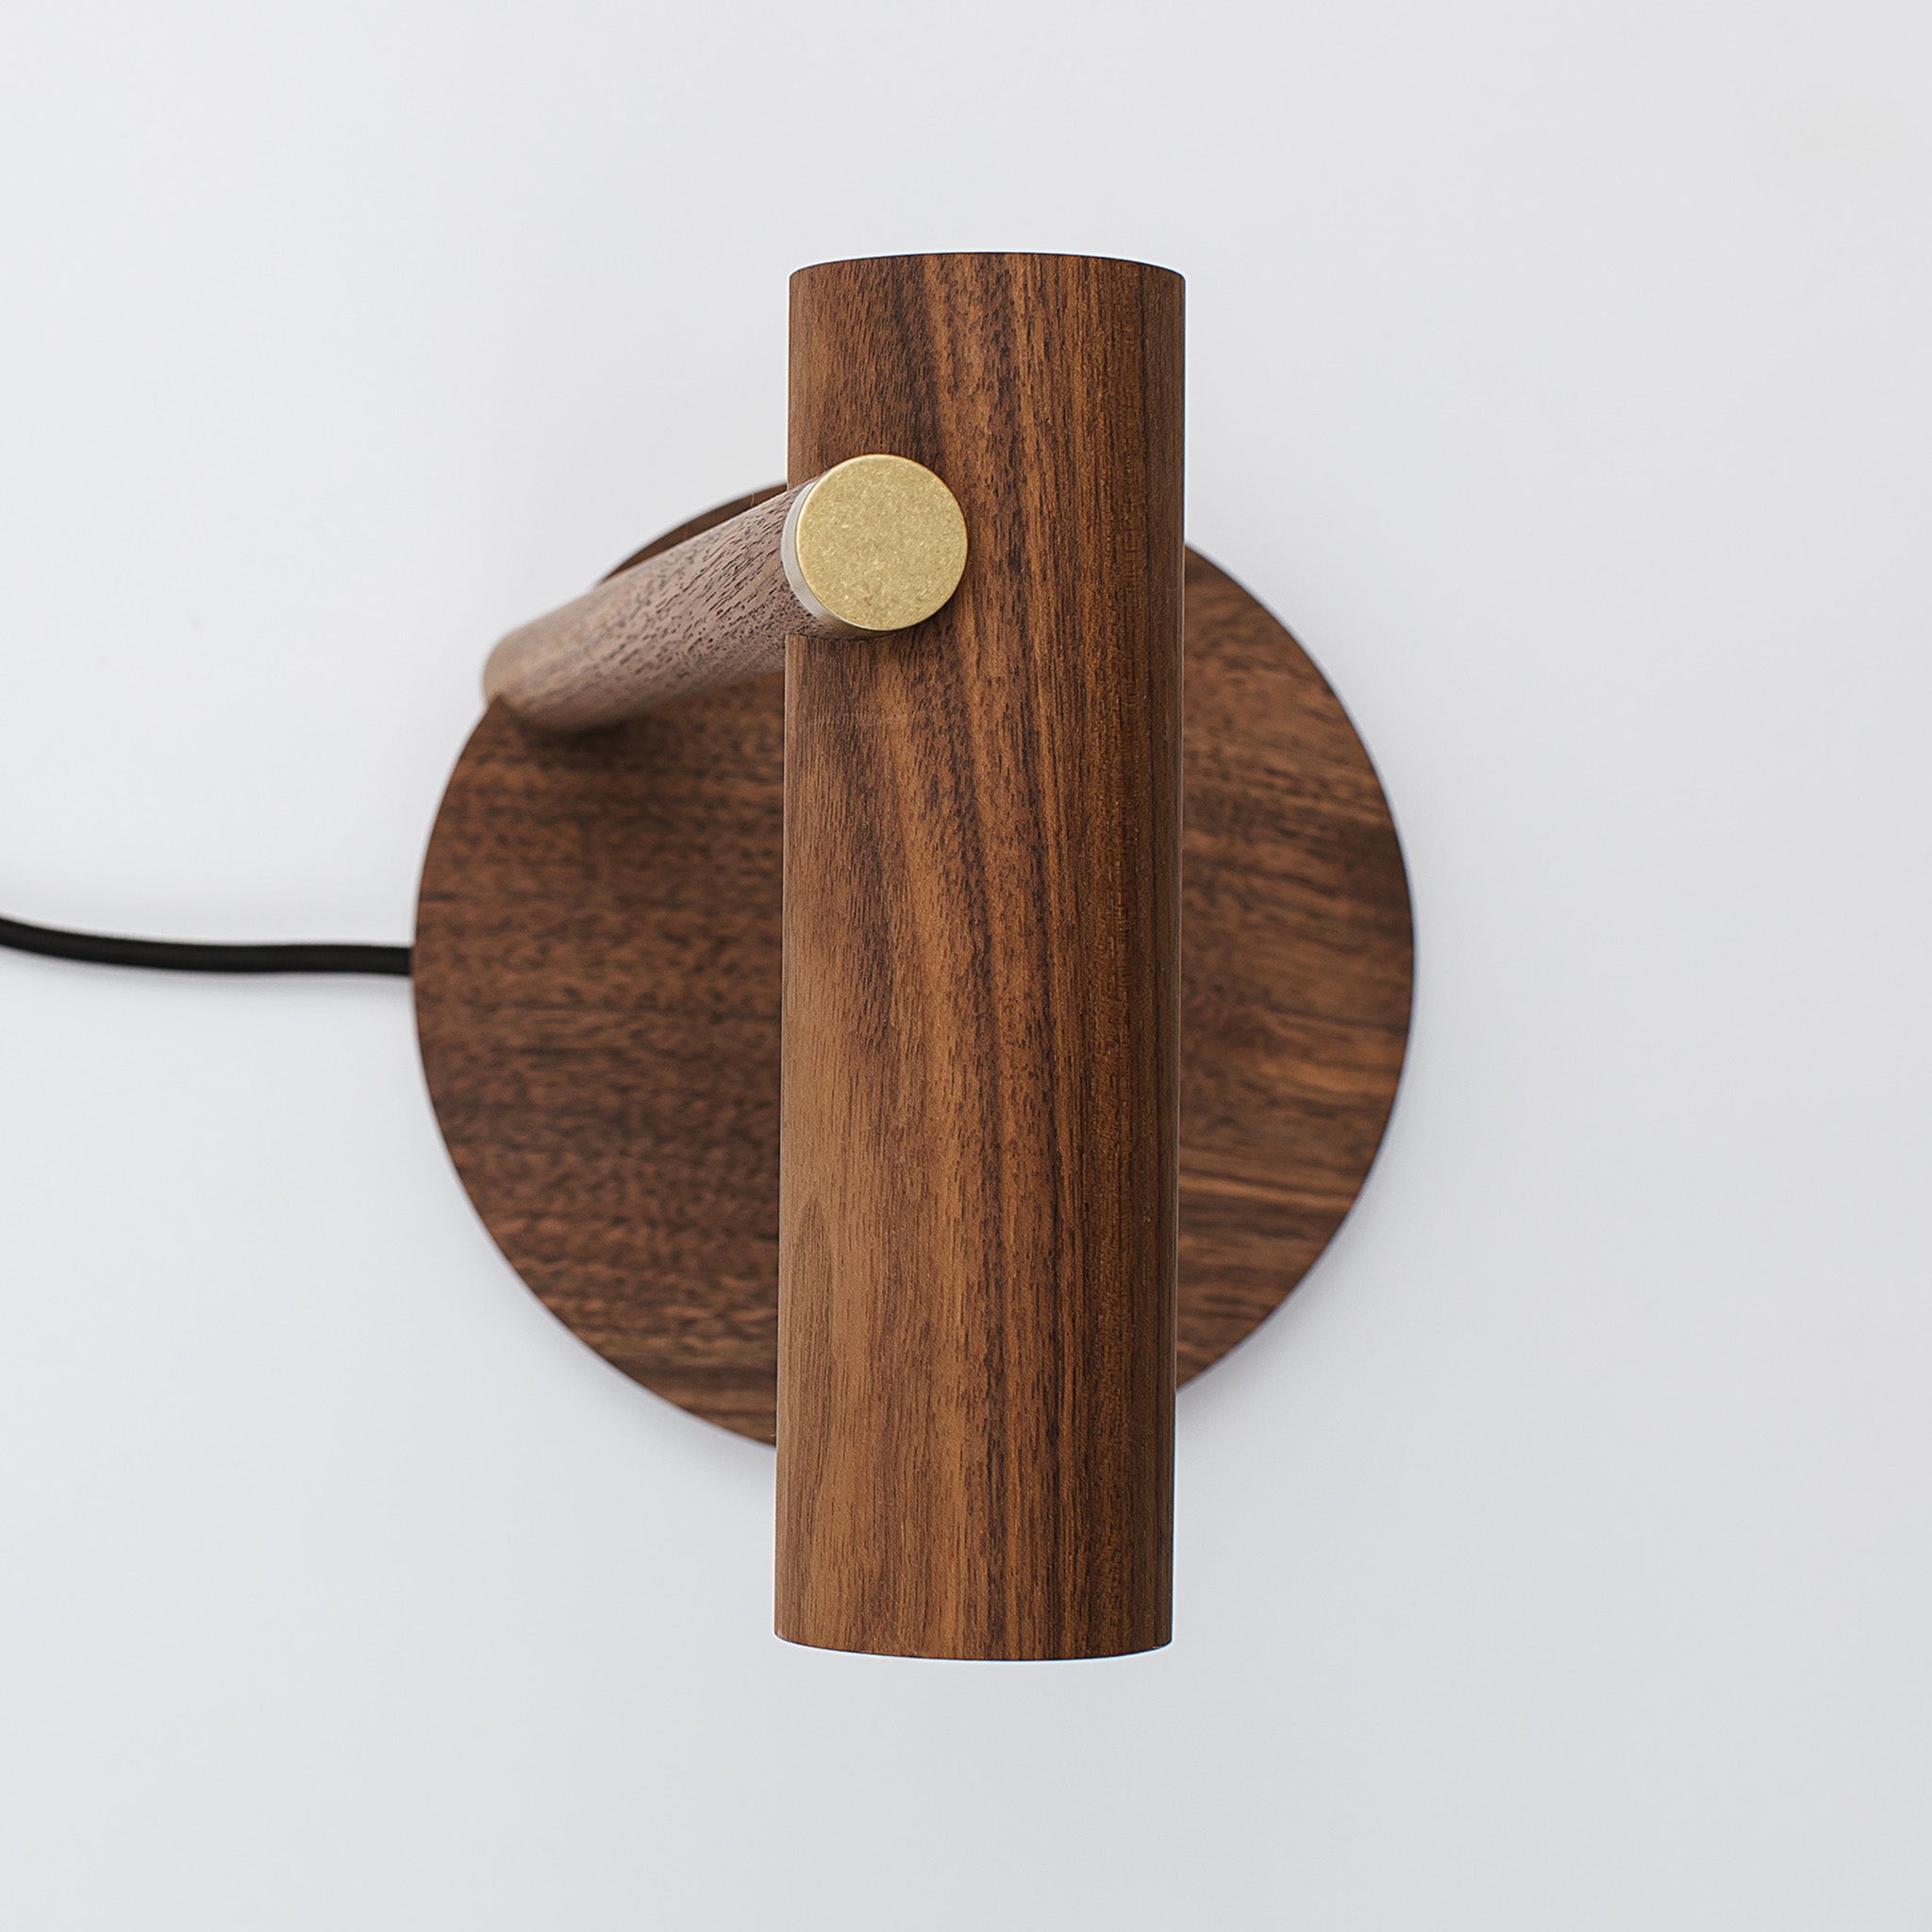 Clean and minimally designed solid wood office lamp -walnut